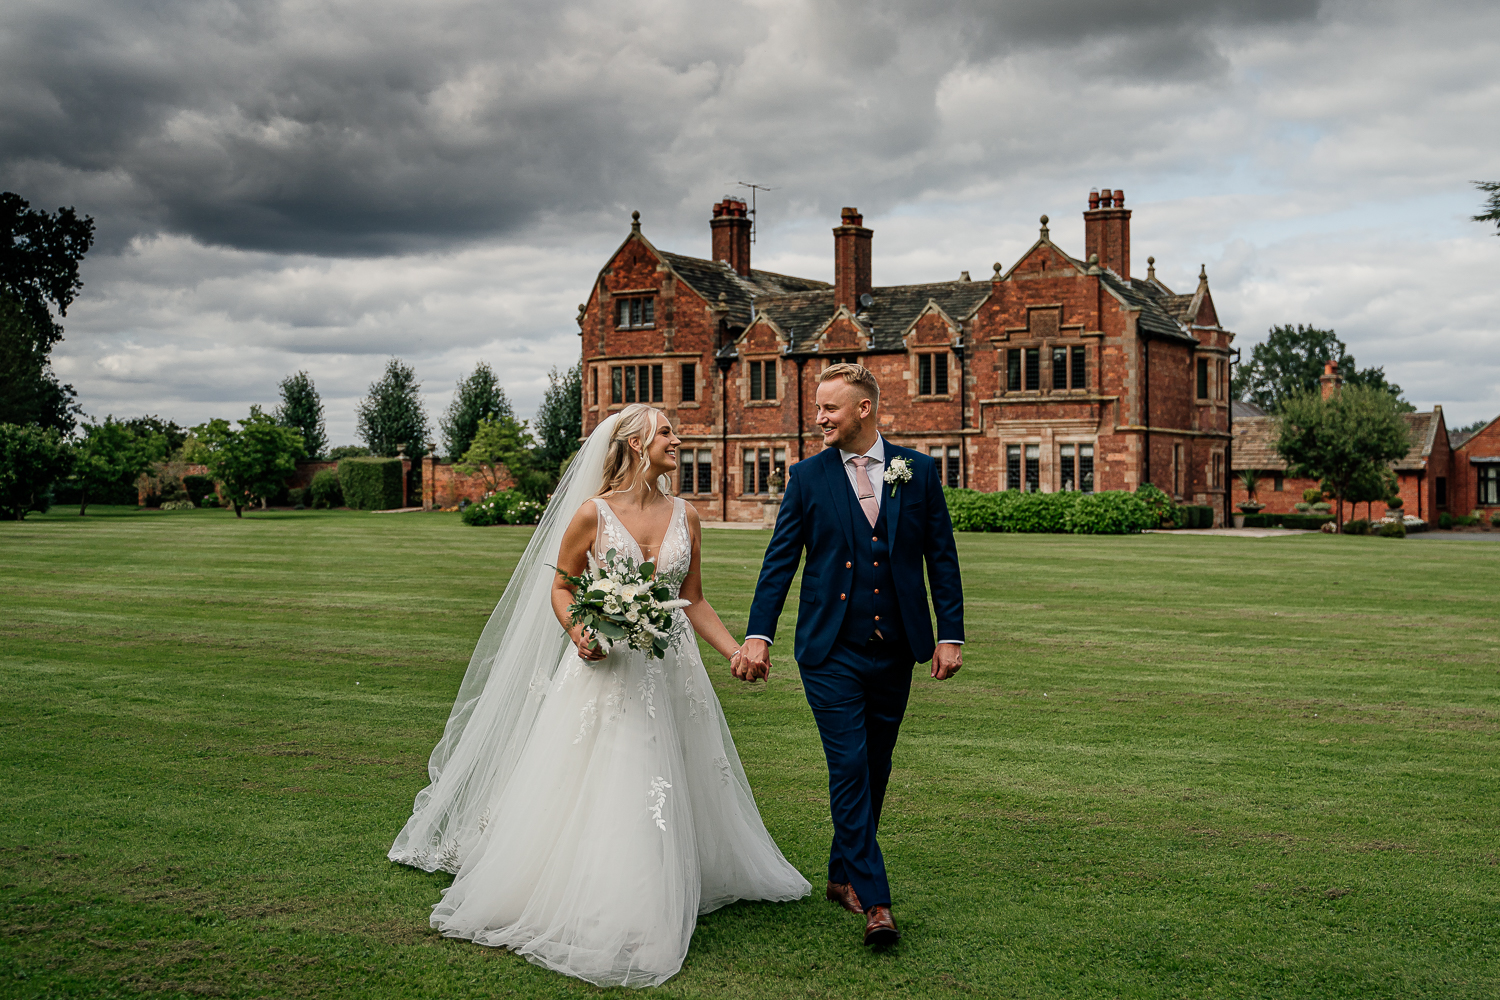 Bride and groom walking at Colshaw Hall